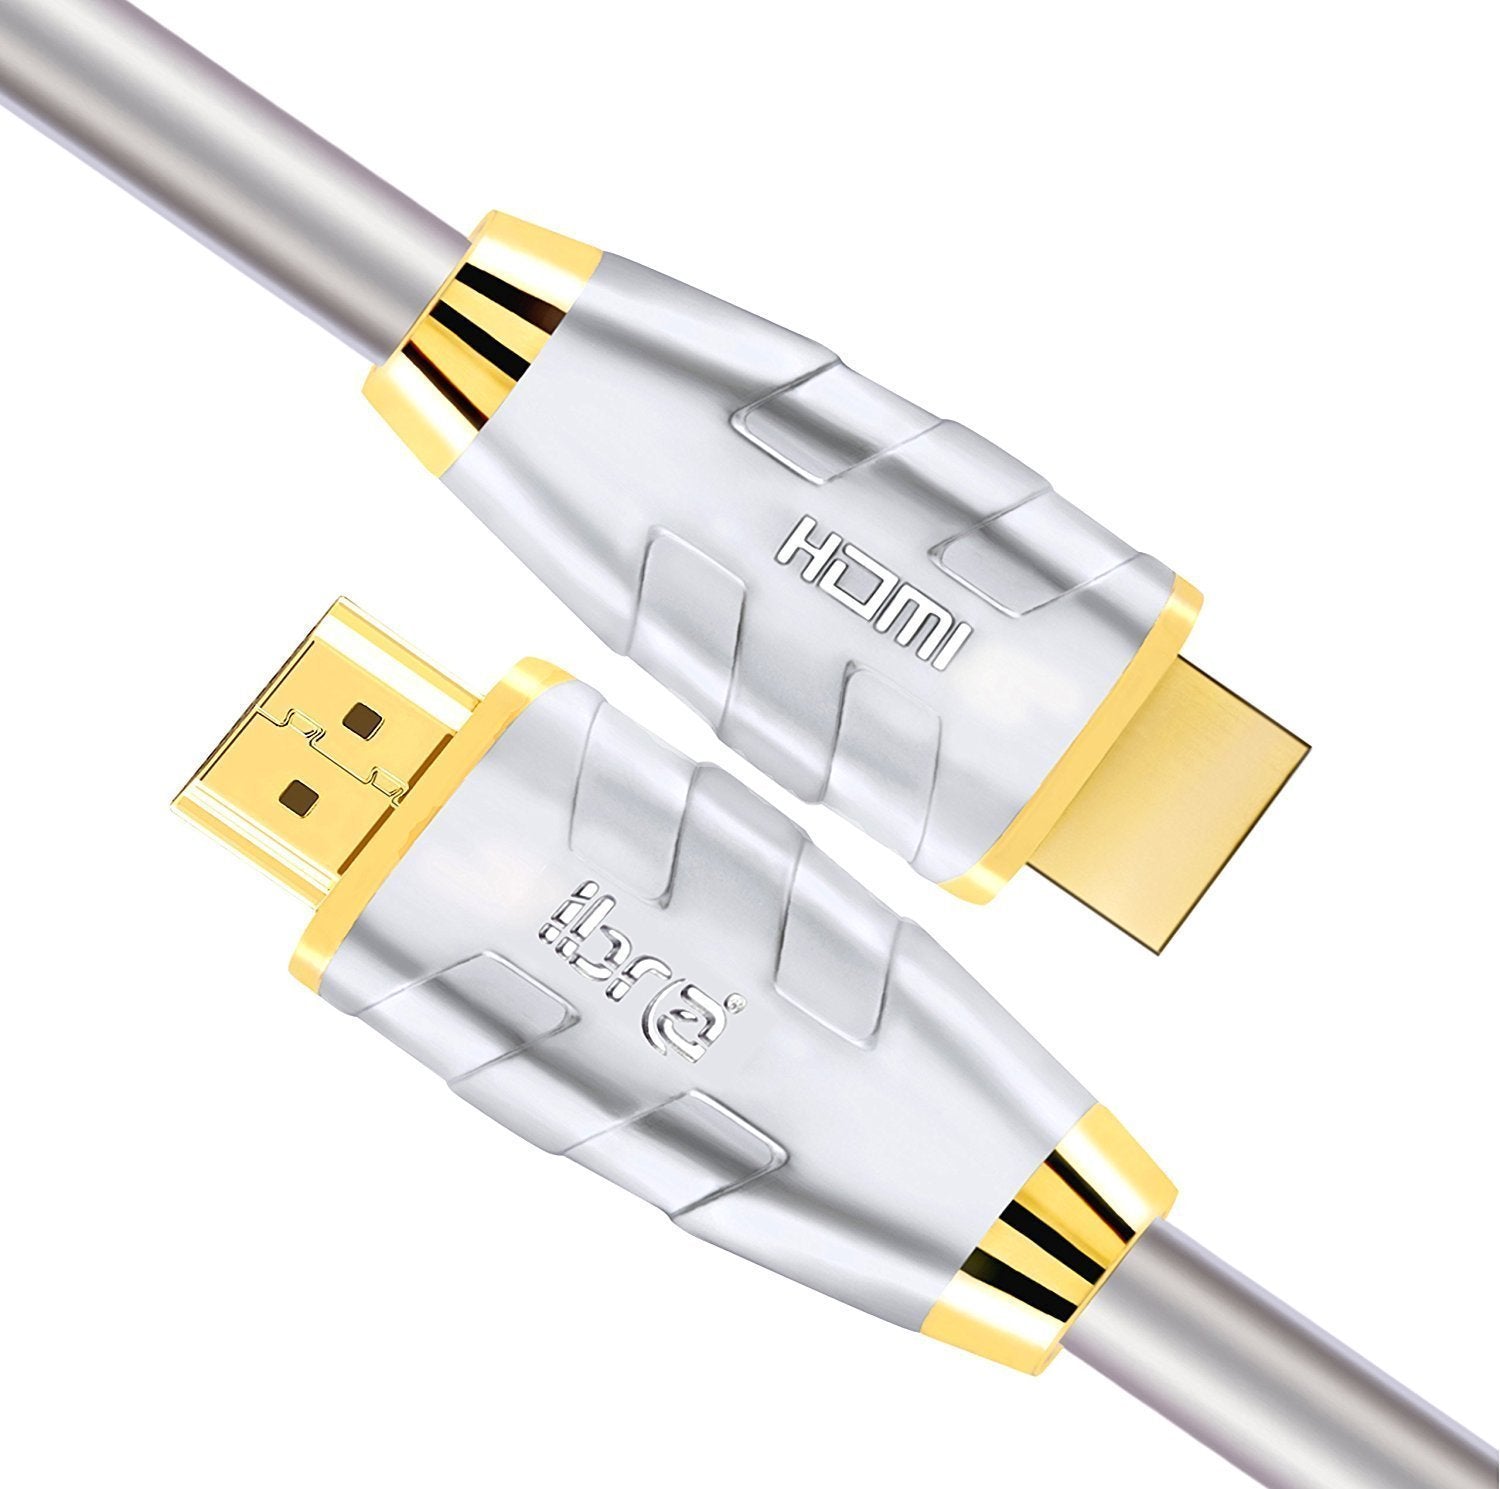 HDMI Cable 1.5M HDMI 2.0(4K@60Hz)-18Gbps+ -28AWG Advanced Braided Cord-Gold Plated Connectors-Ethernet,Audio Return Video 4K2160p HD1080p3D Xbox PlayStation PS3 PS4 AppleTV-IBRA Advance(Updated Version)